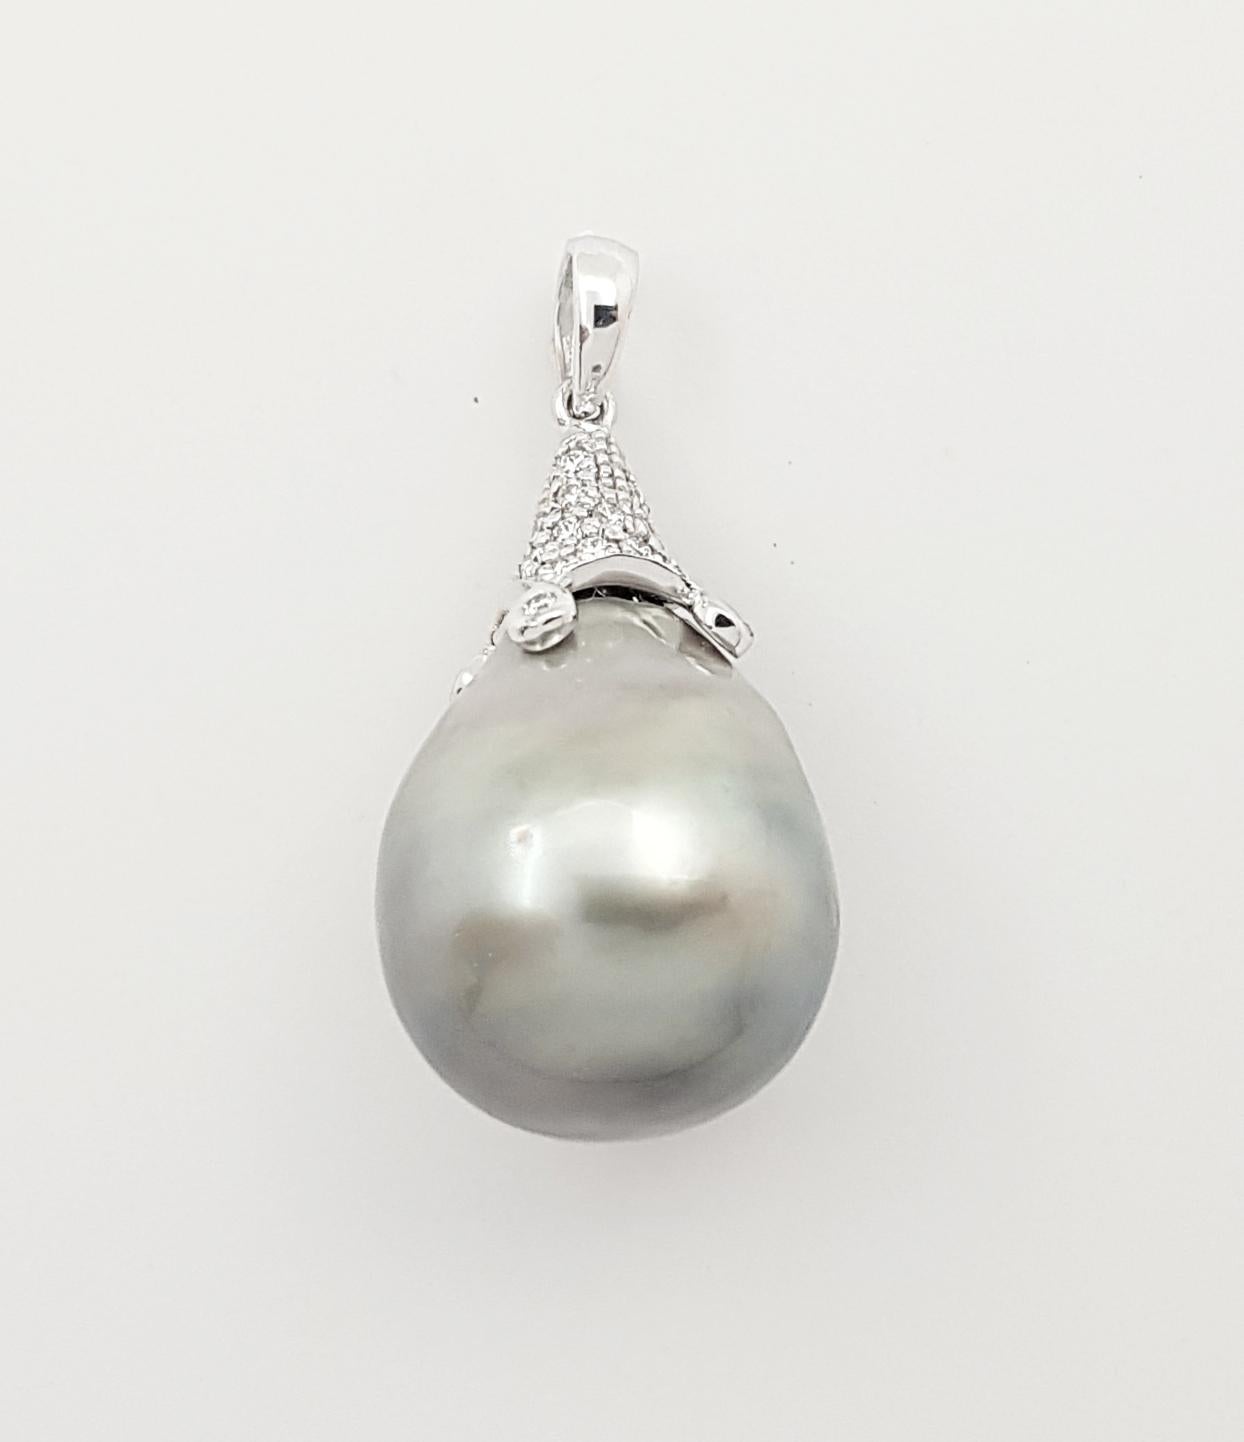 South Sea Pearl with Diamond 0.27 carat Pendant set in 18K White Gold Settings
(chain not included)

Width: 1.5 cm 
Length: 3.1 cm
Total Weight: 6.71 grams

South Sea Pearl Approximately: 14 mm

